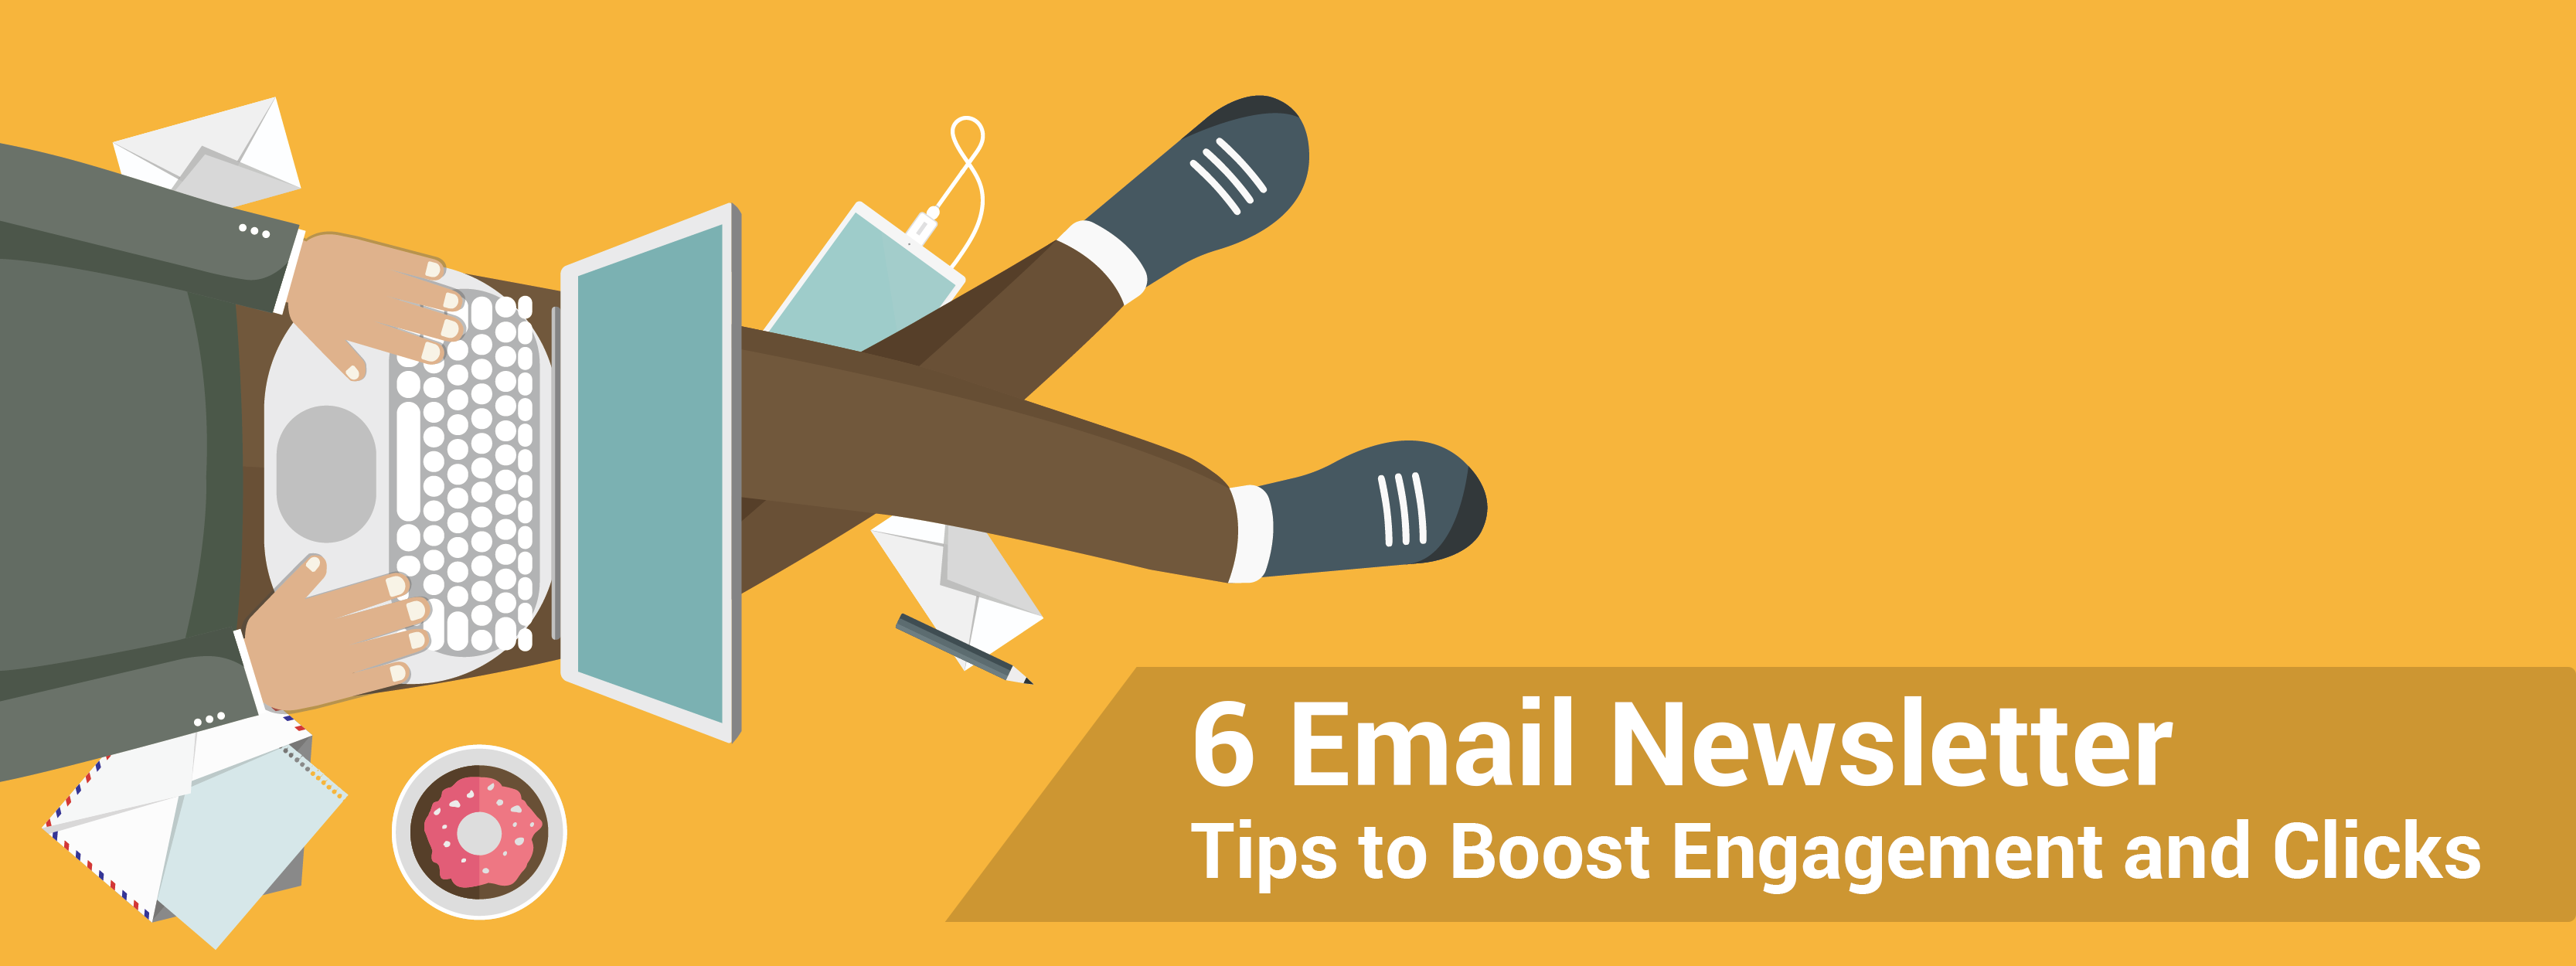 6 email newsletter tips to boost engagement and clicks